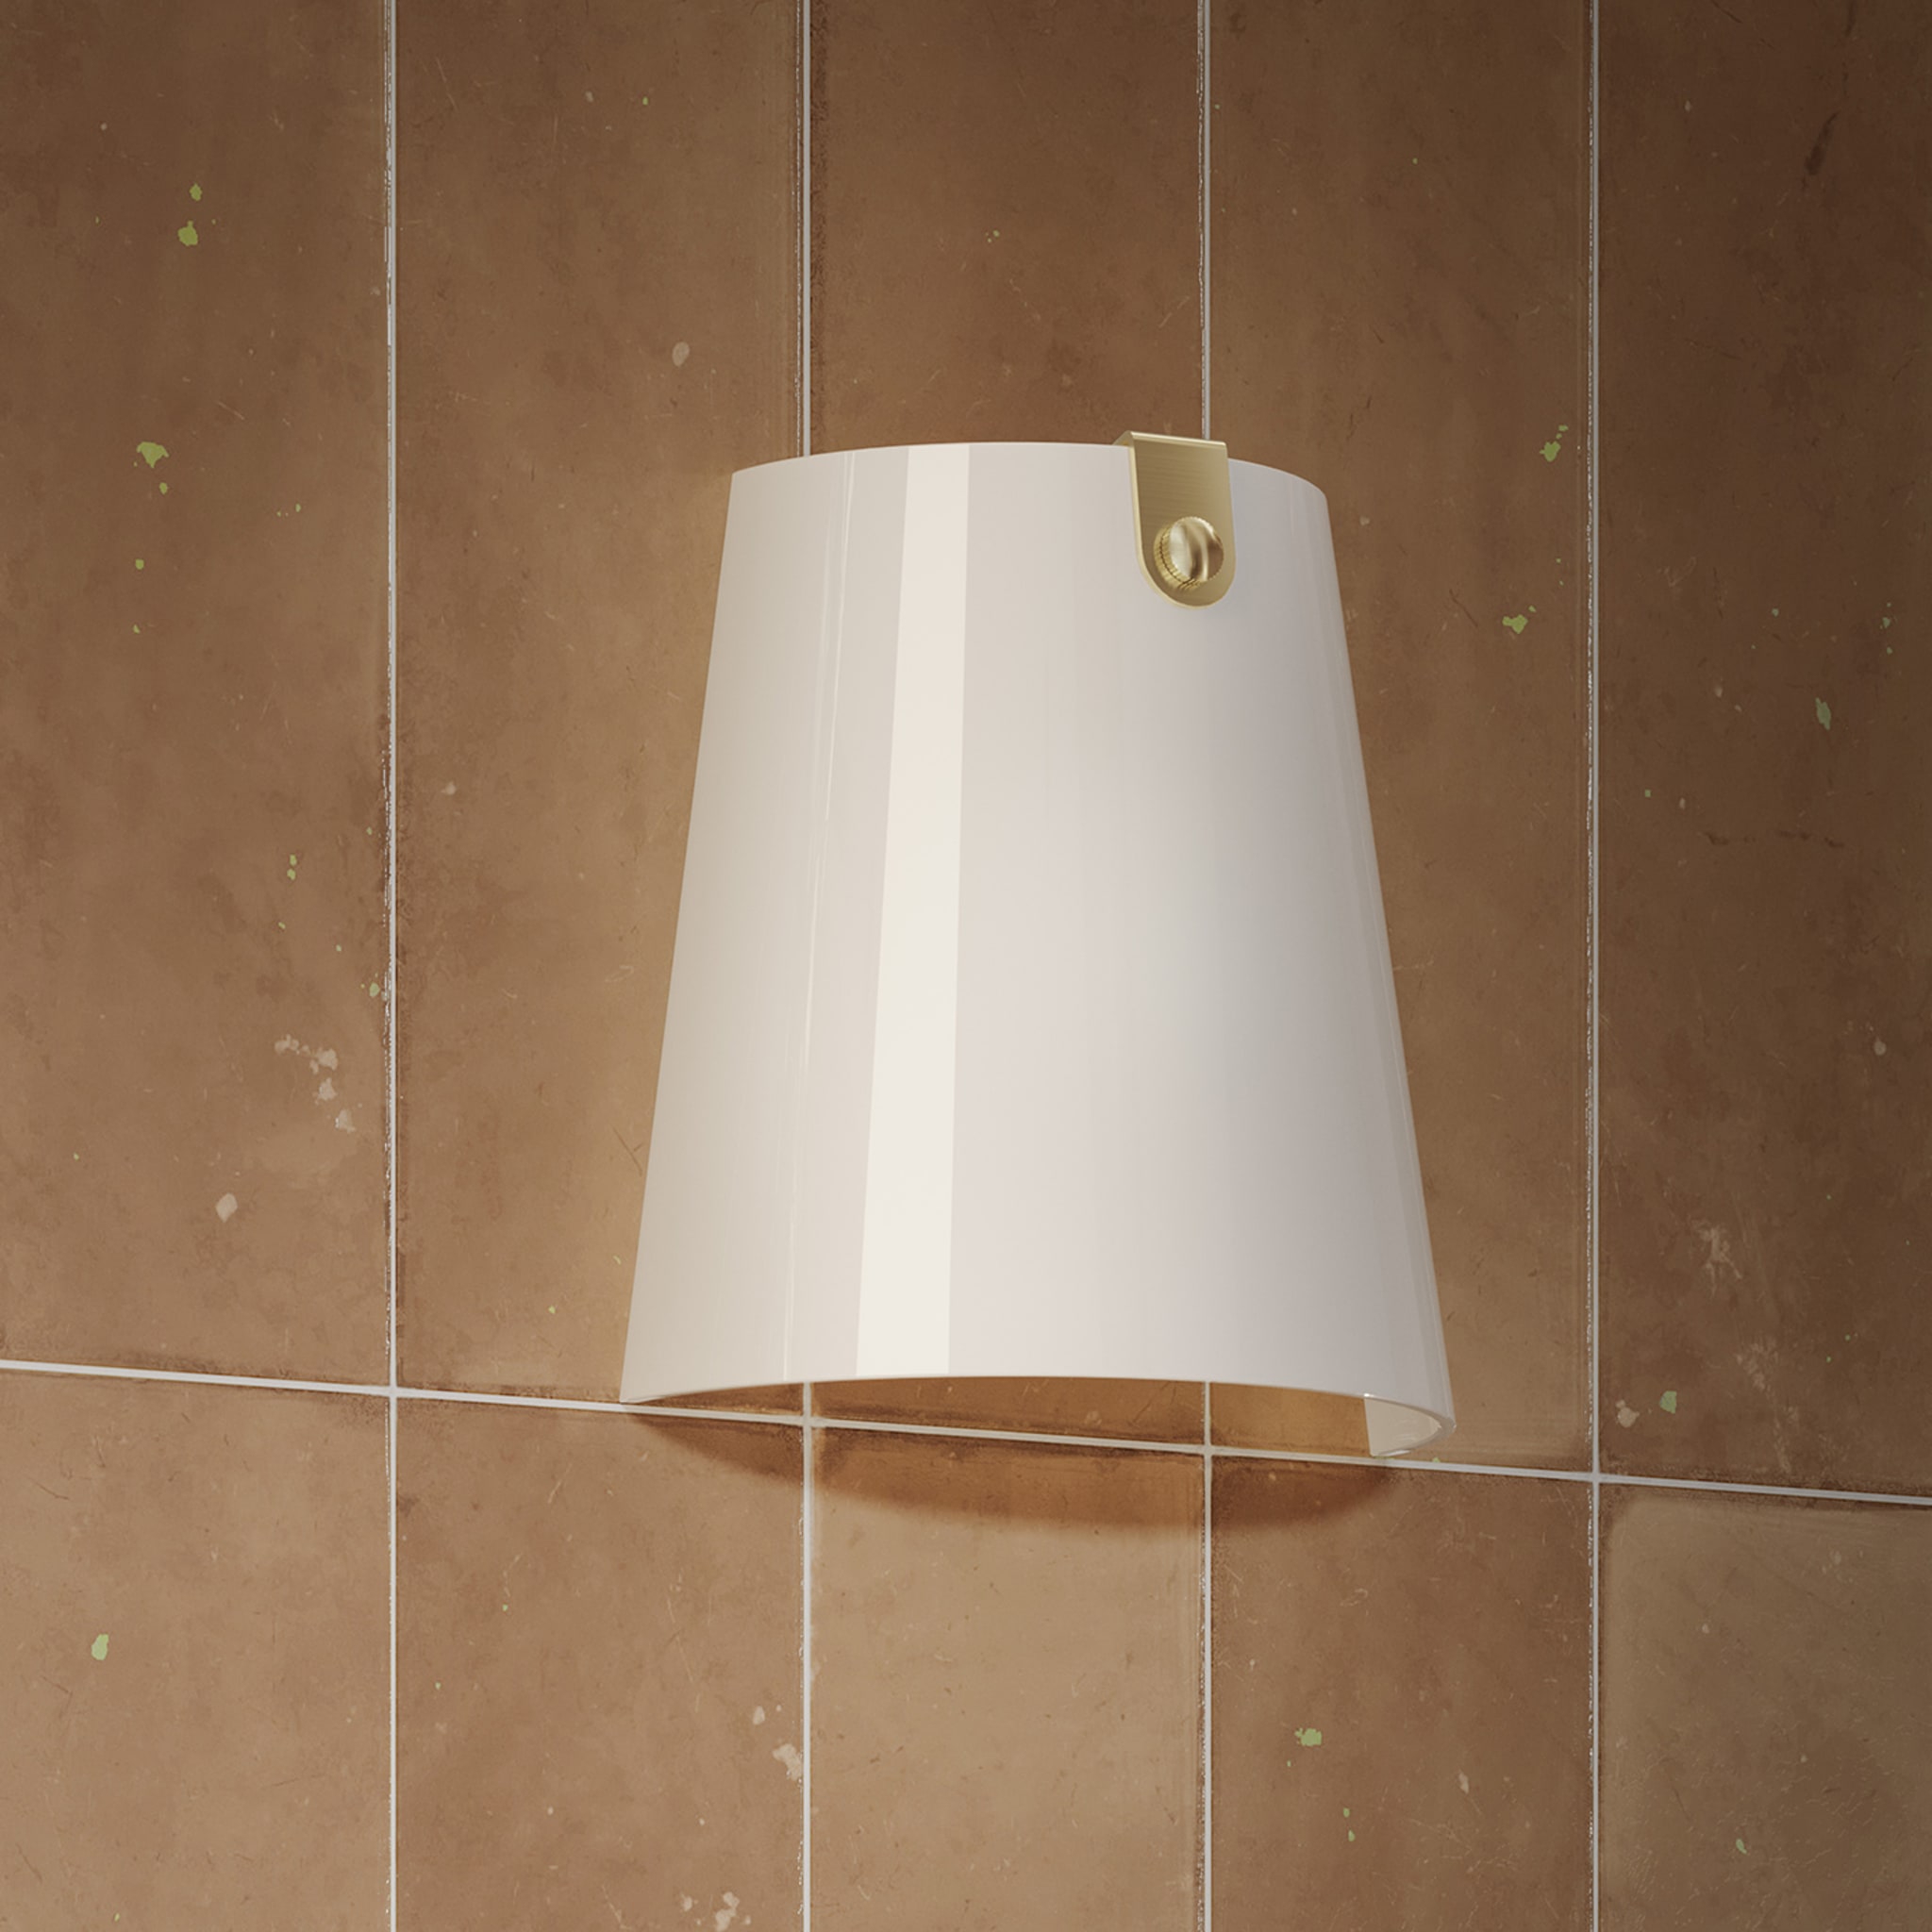 Bell Natural Brass & White Glass Wall Lamp - Alternative view 1